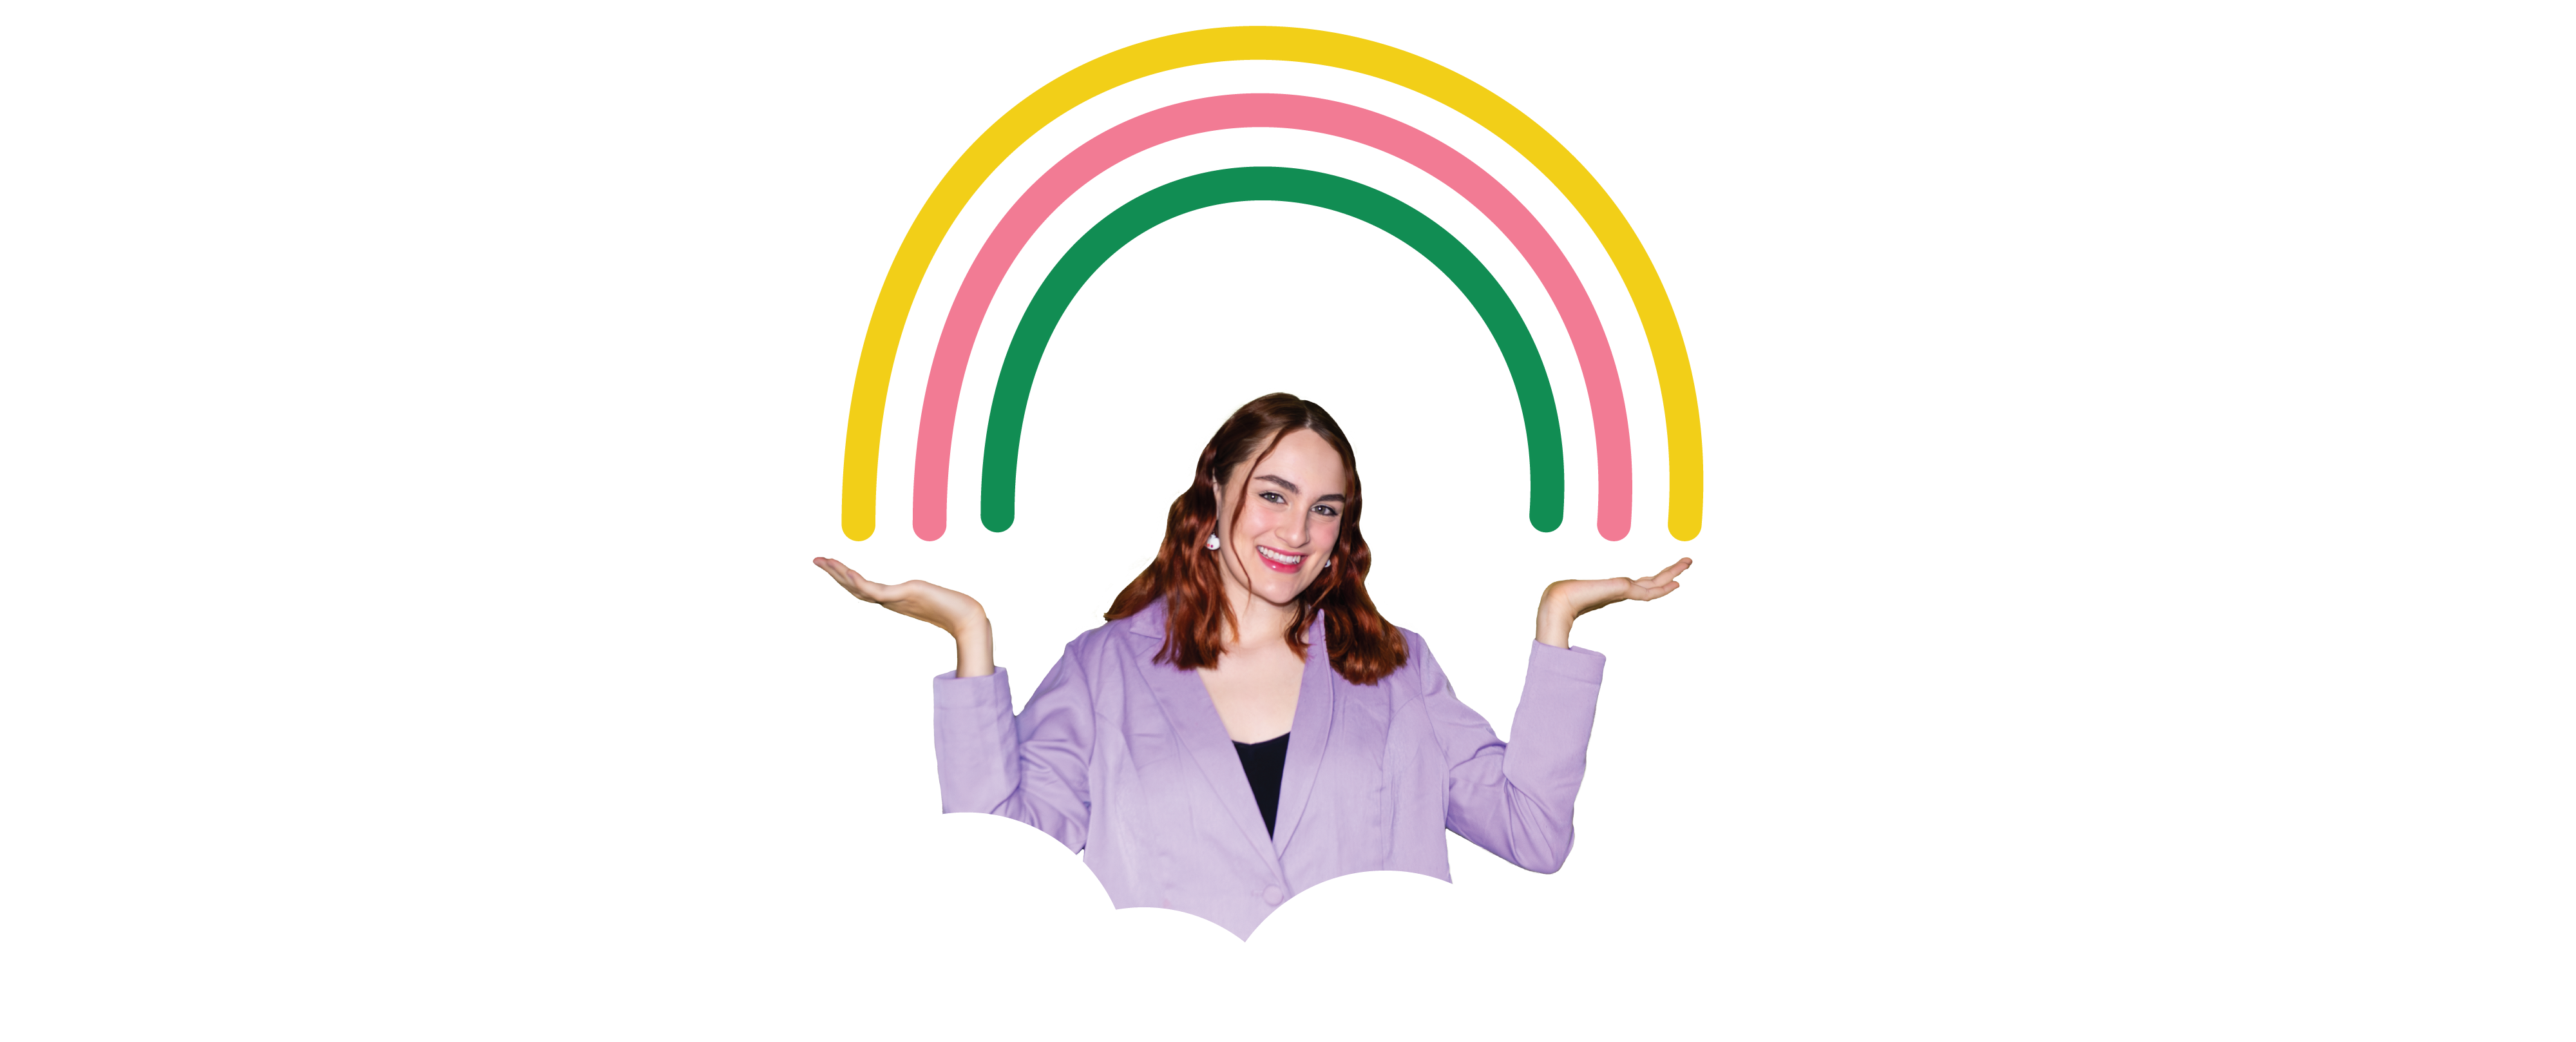 Banner Image of Chelsea holding rainbow popping out of clouds.